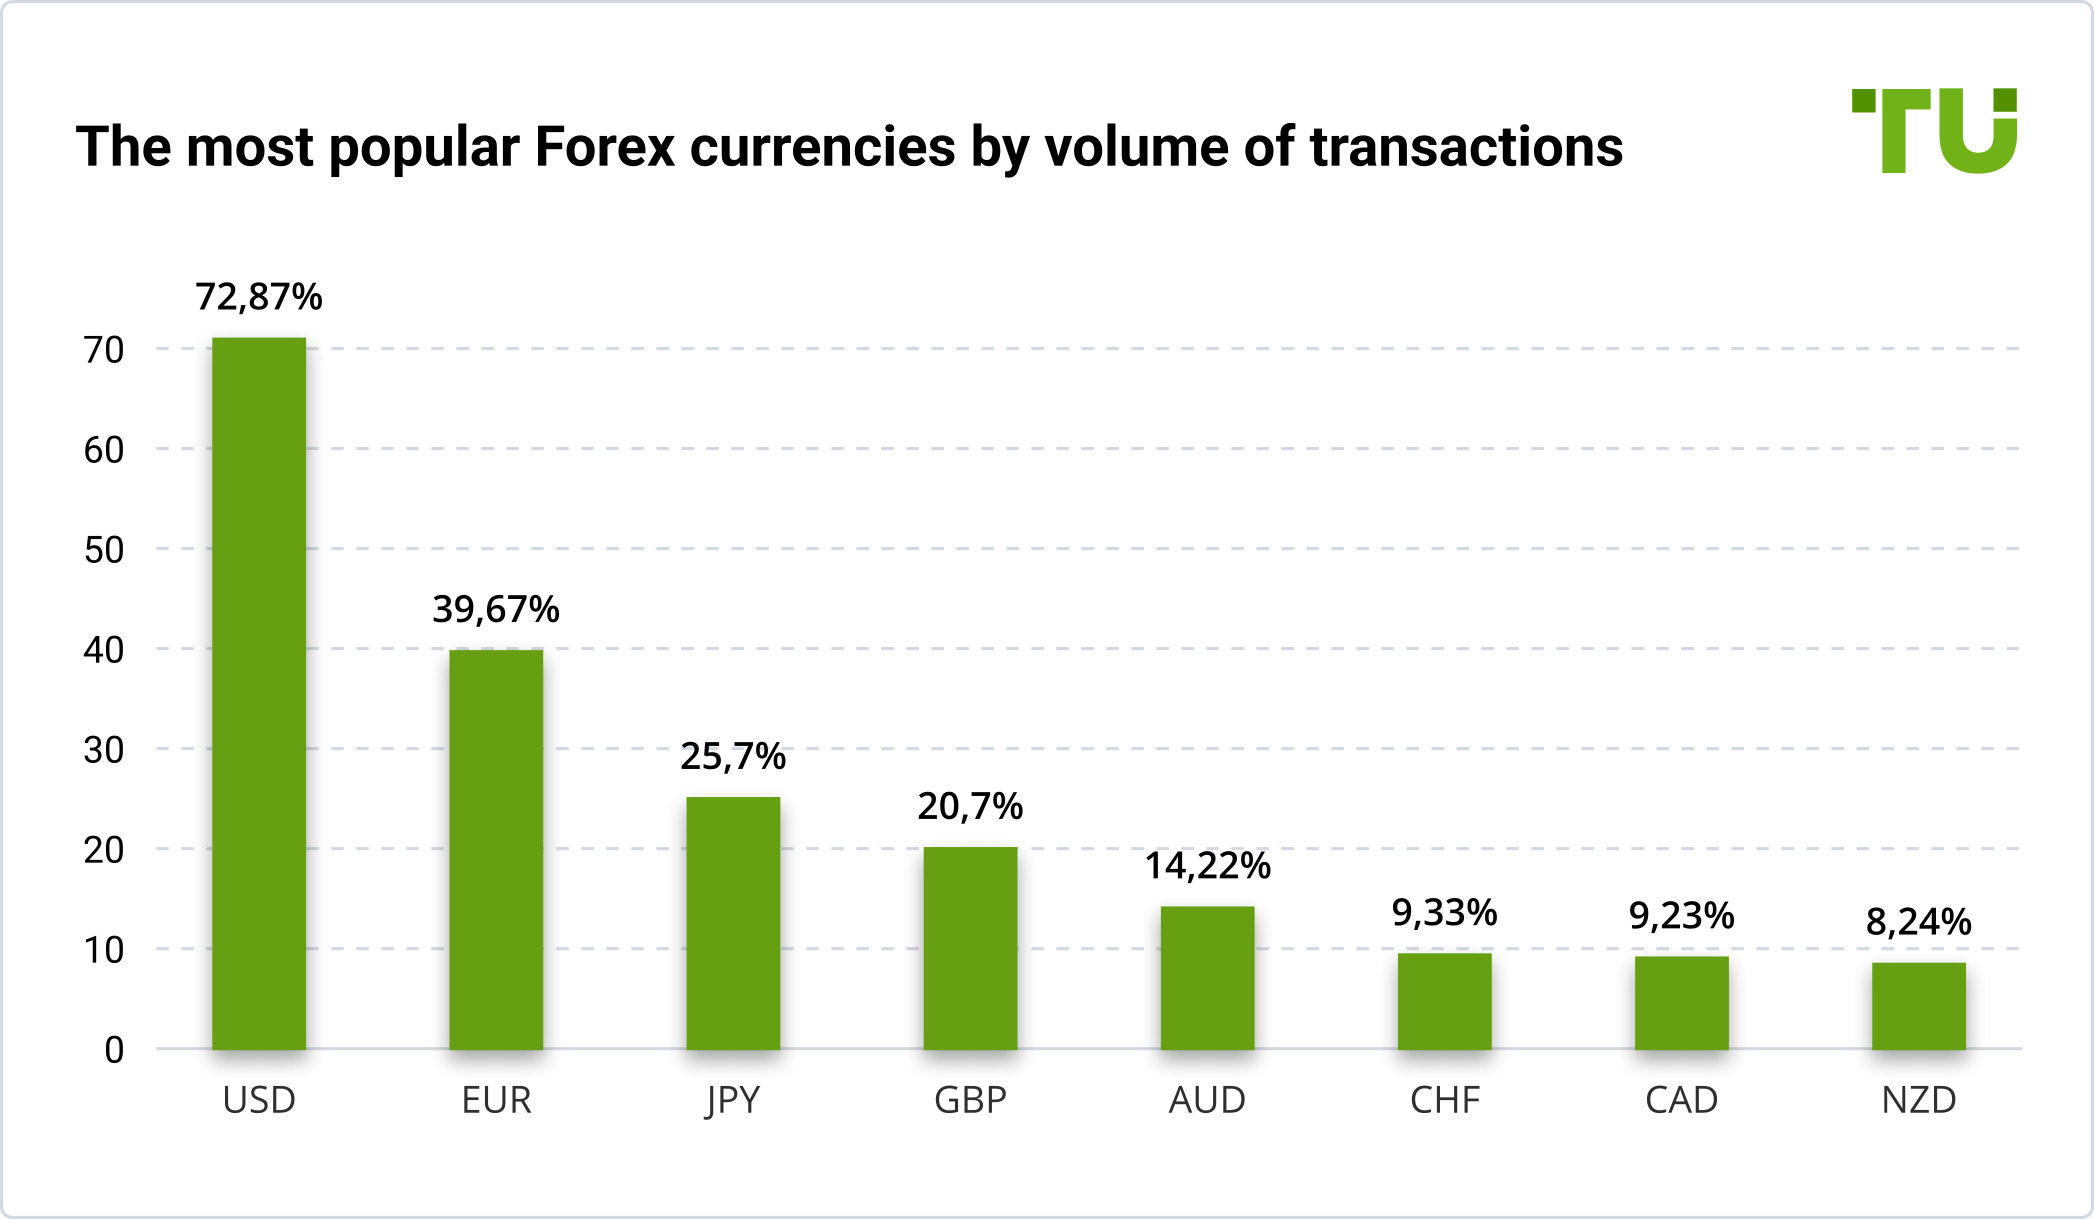 The most popular Forex currencies by volume of transactions